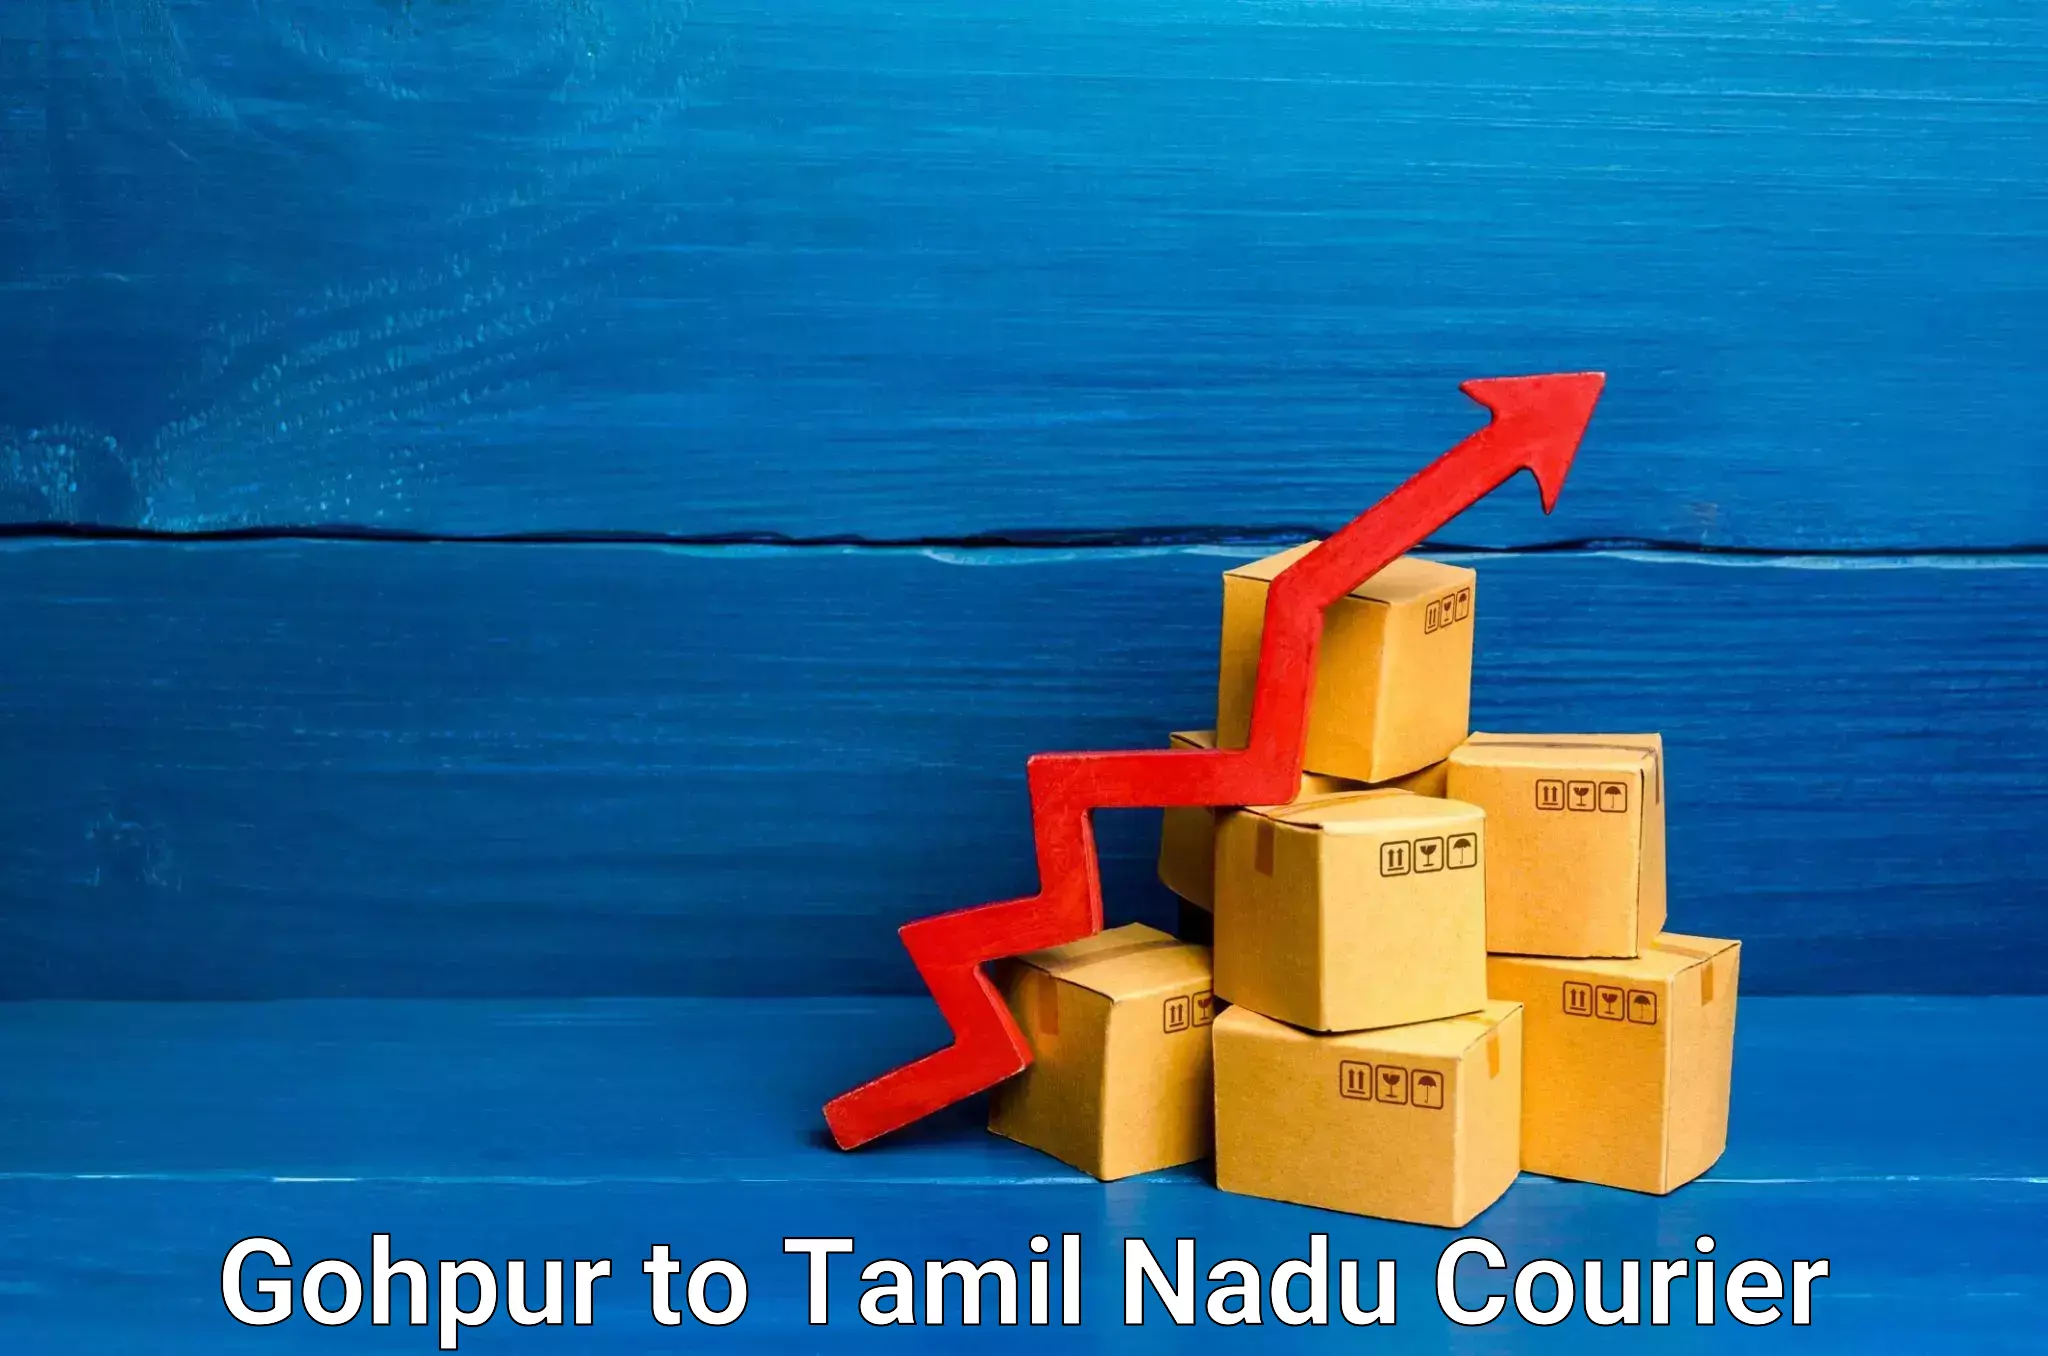 Same-day delivery solutions in Gohpur to Ennore Port Chennai